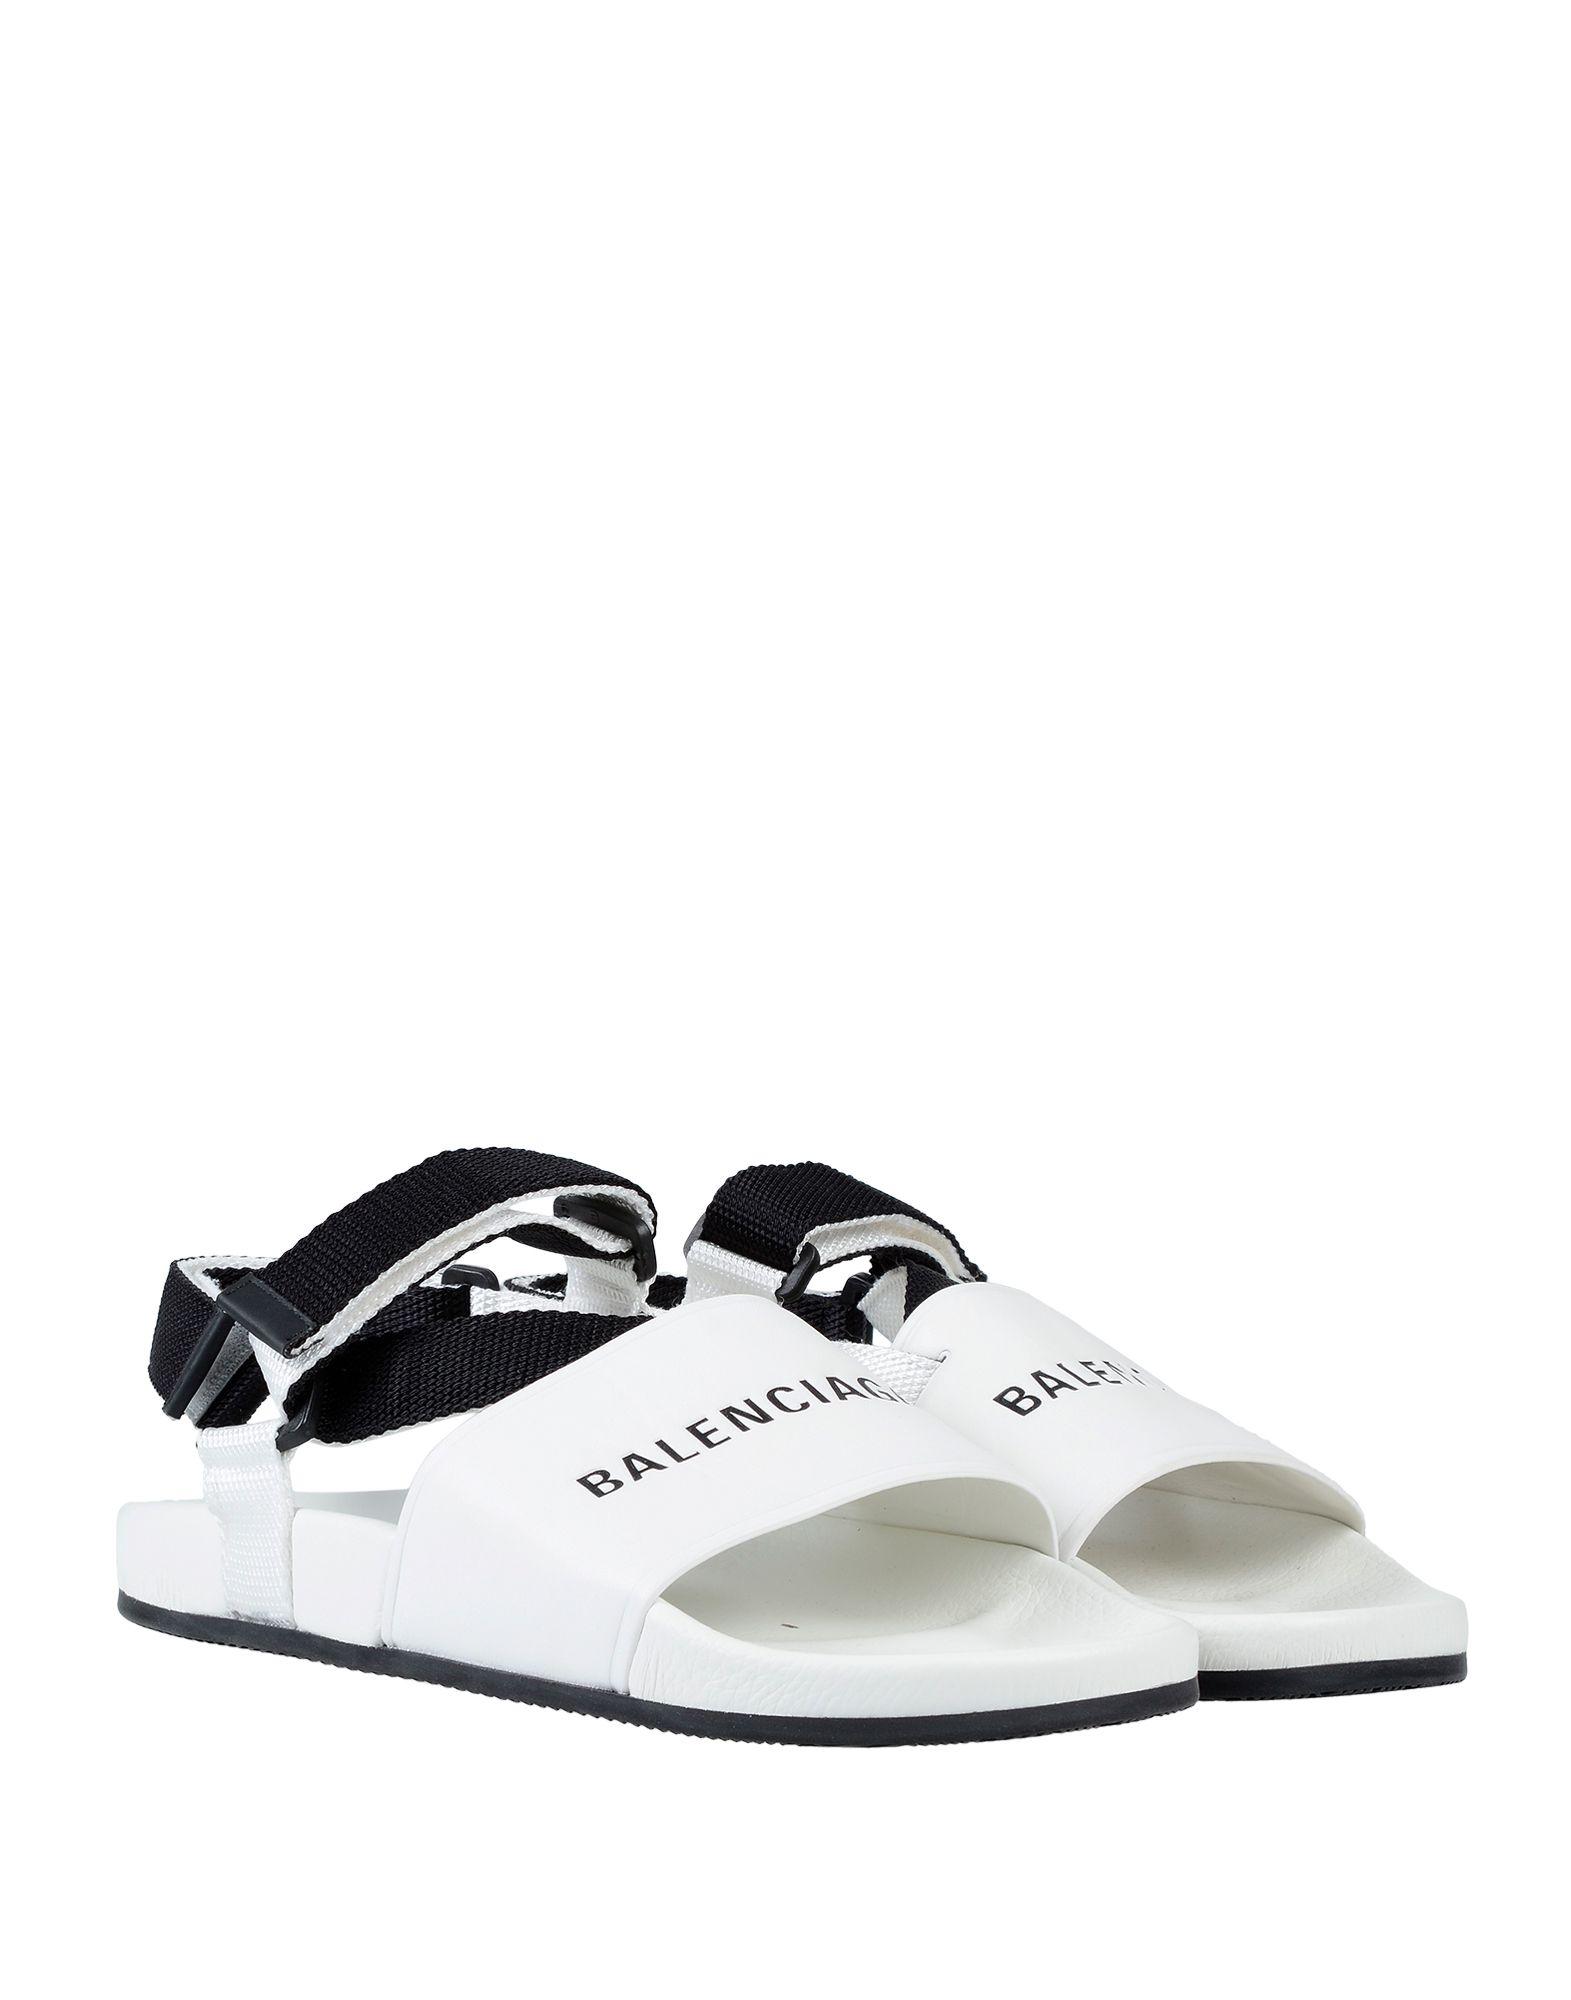 Balenciaga Leather Sandals in White for Men - Lyst